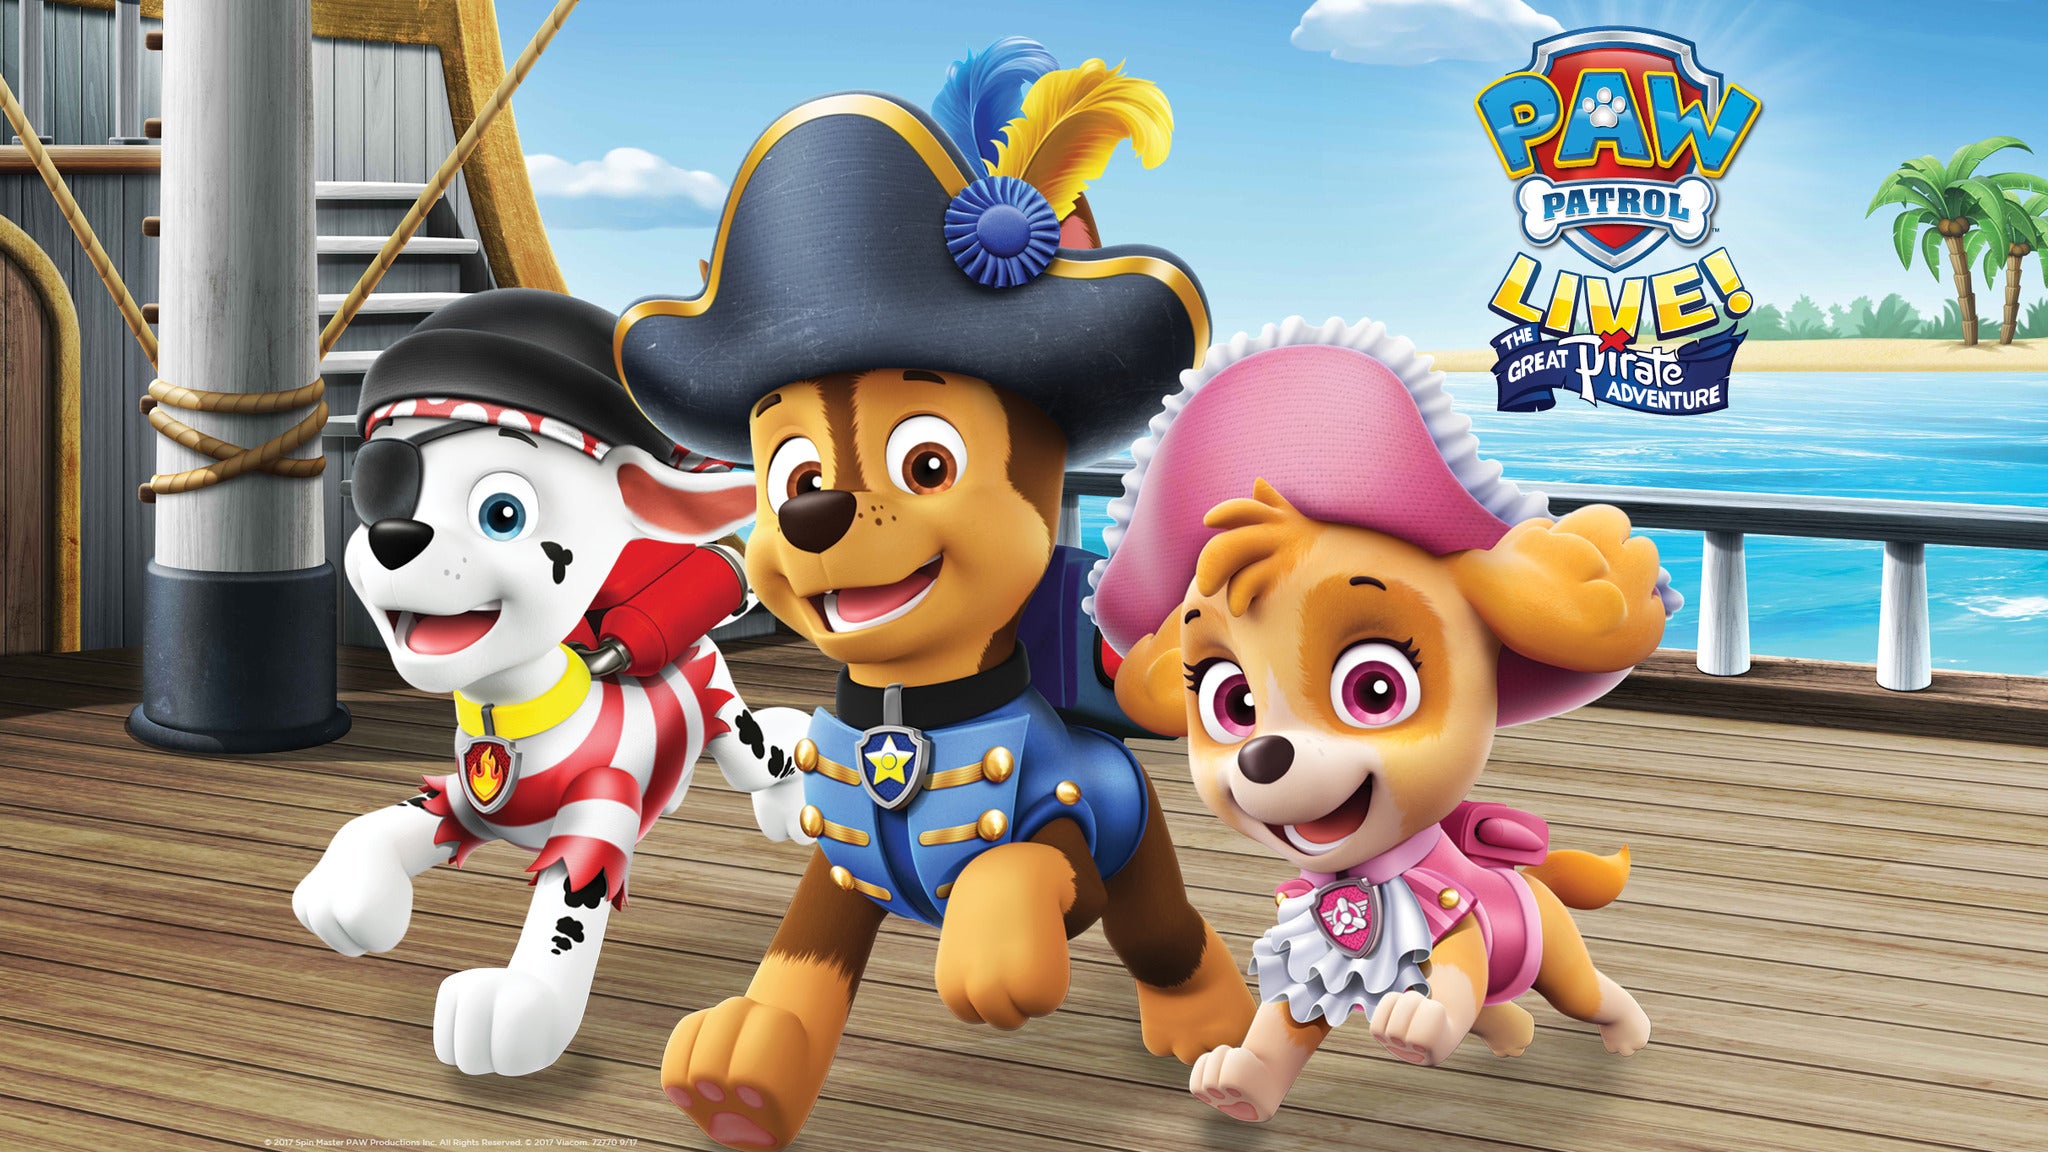 PAW Patrol Live! The Great Pirate Adventure in Portland promo photo for Citi® Cardmember presale offer code